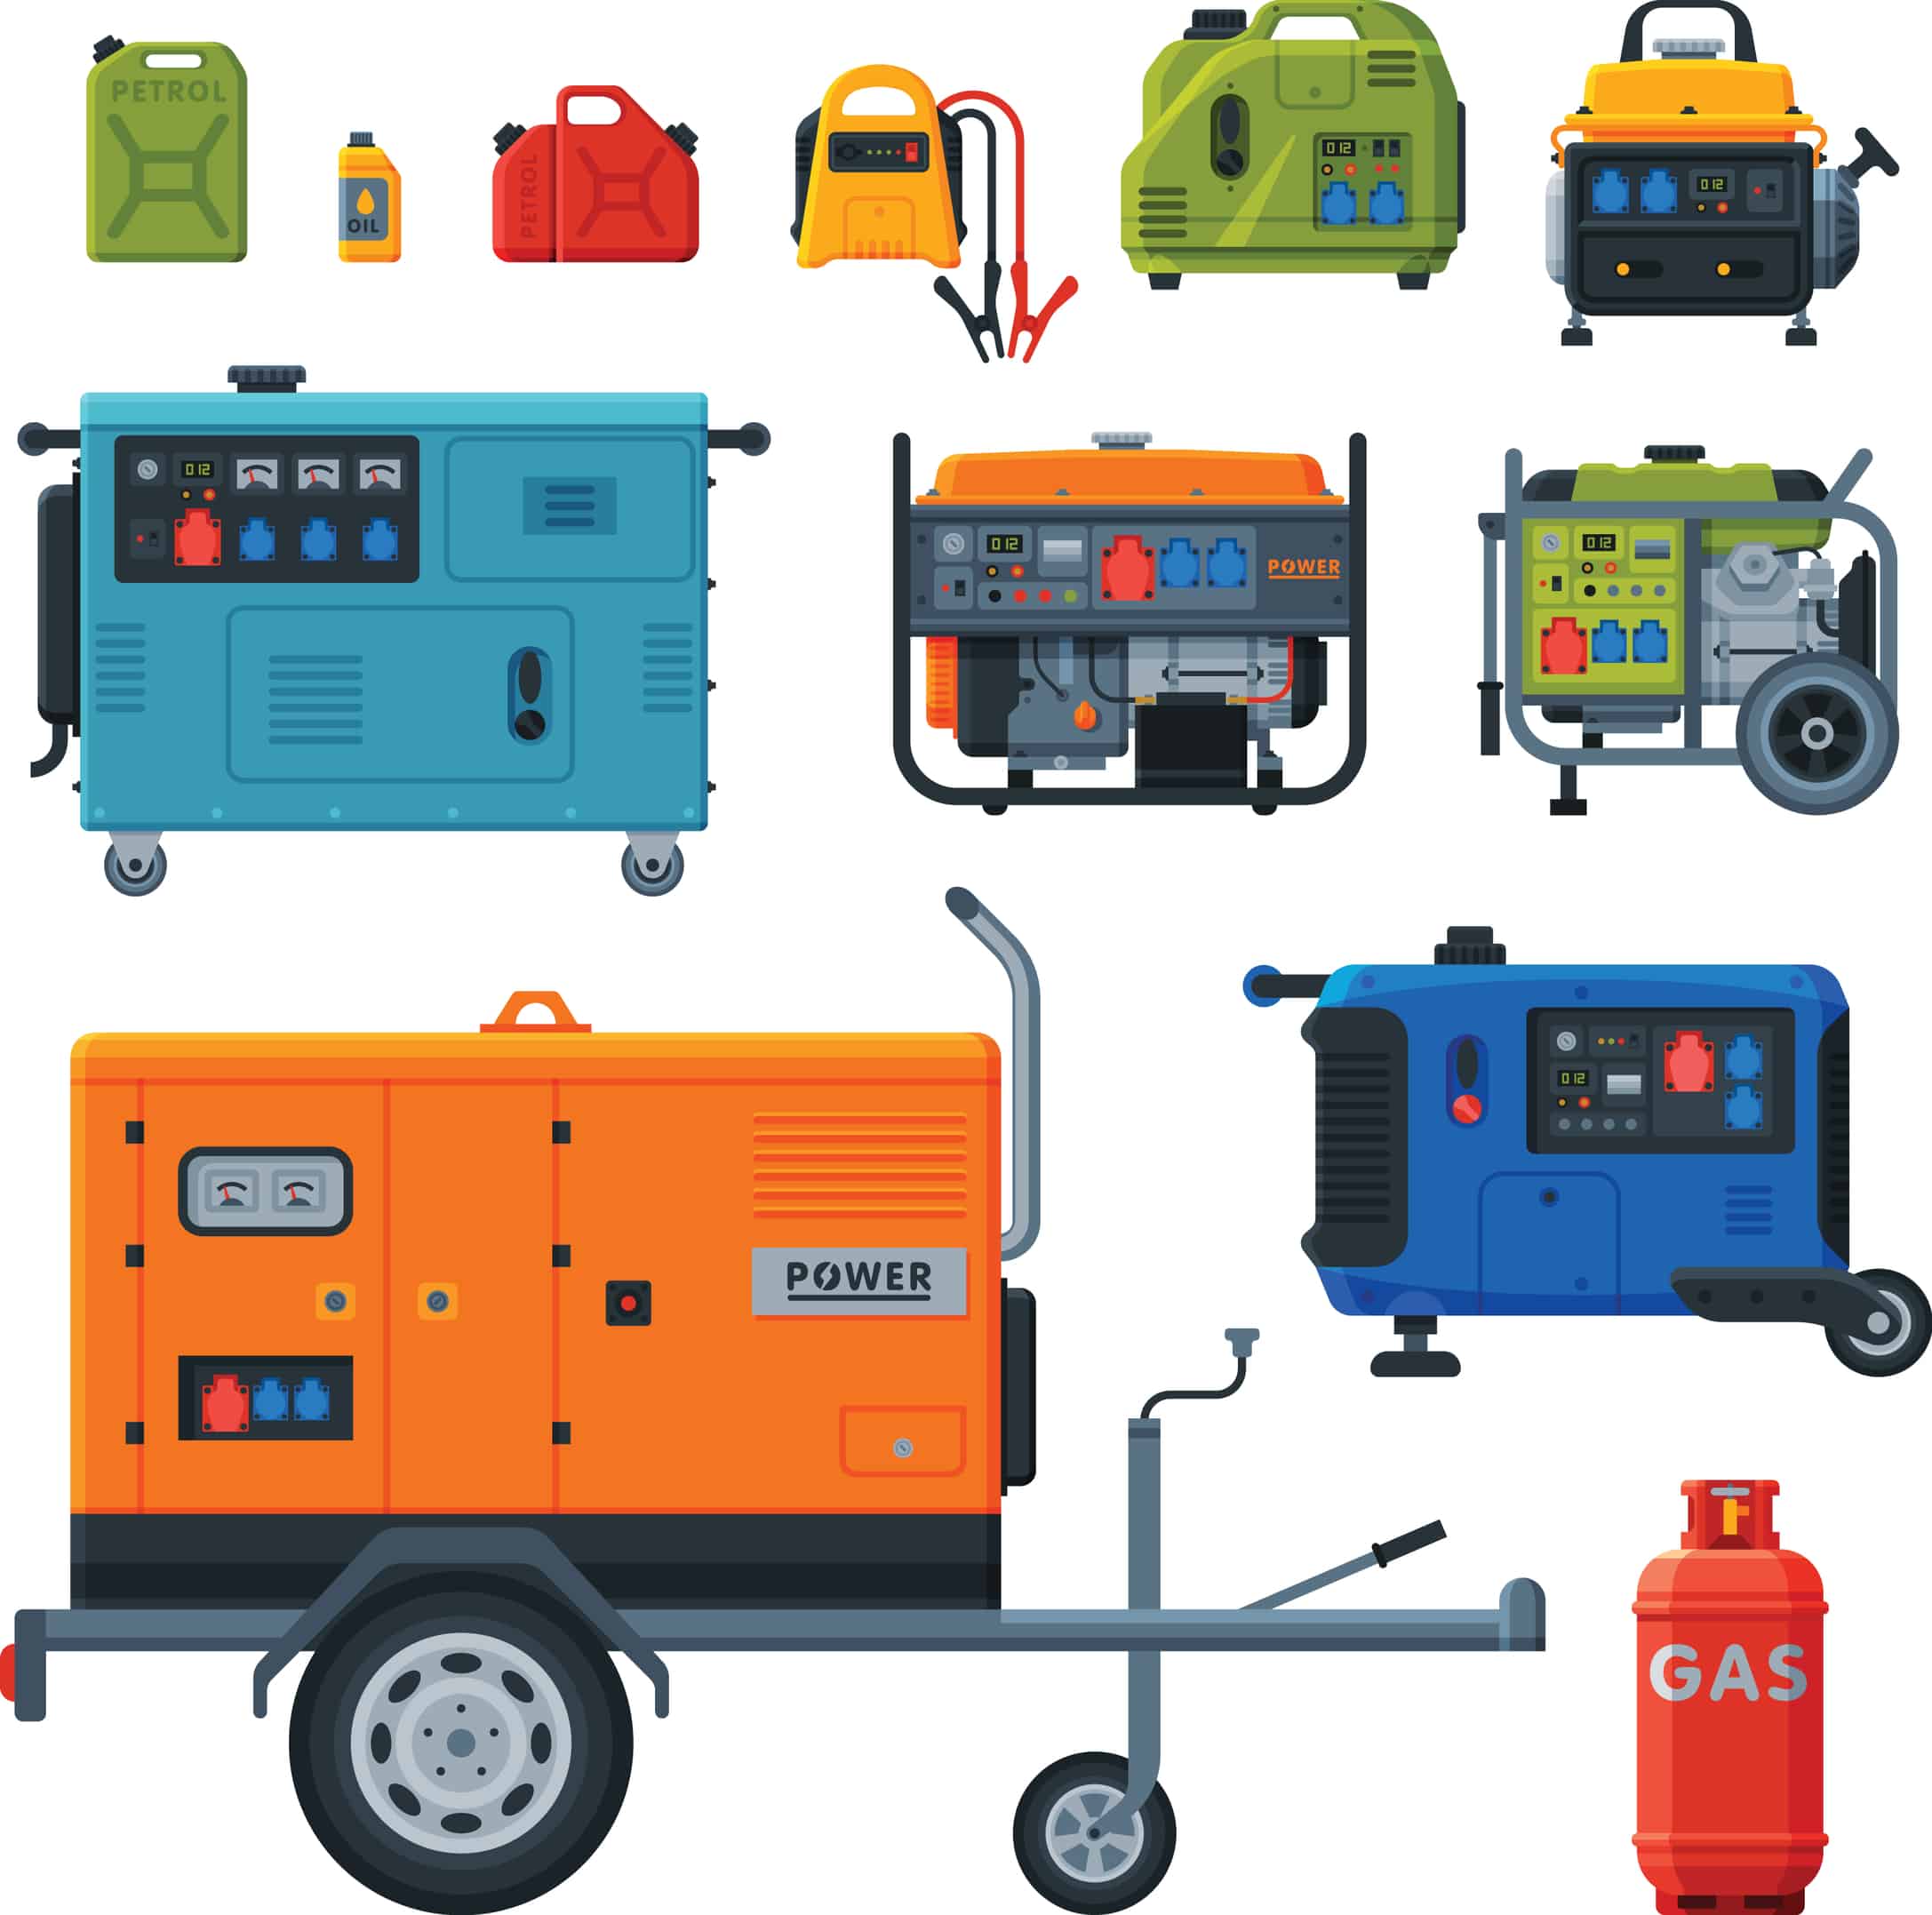 Different Types of Industrial Power Generators Set, Propane Gas Cylinder, Fuel Jerrycans Vector Illustration